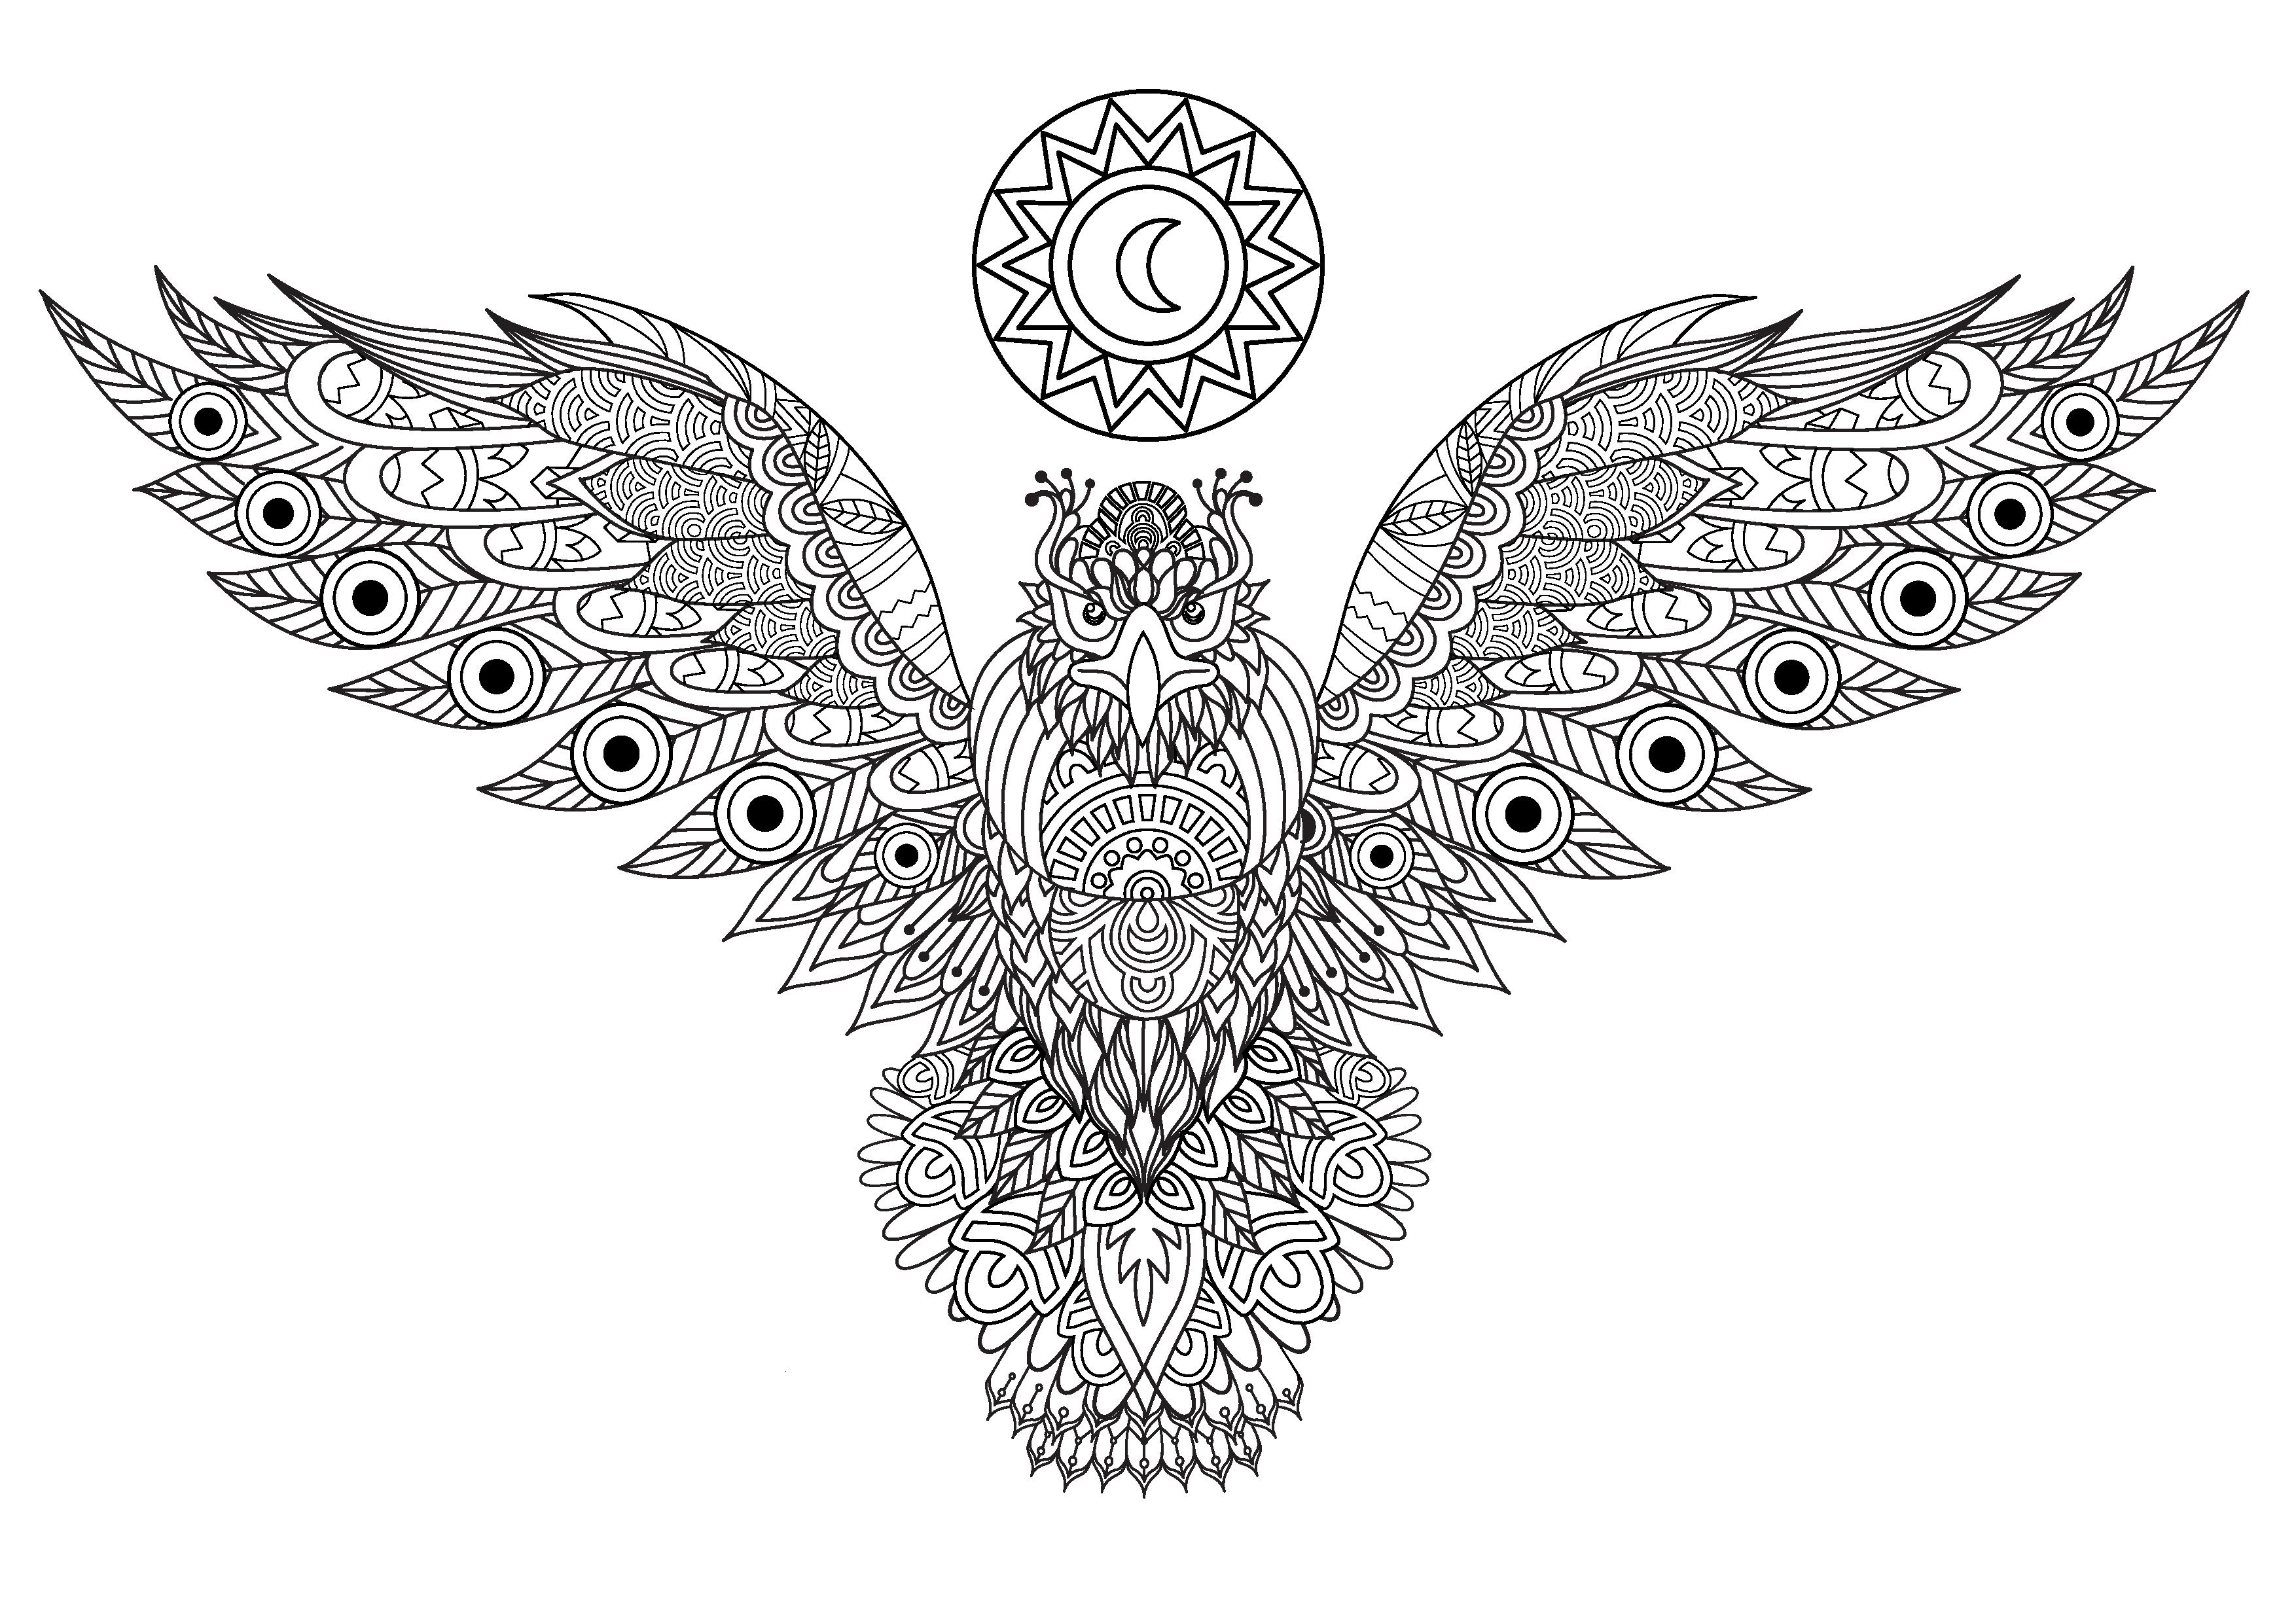 Majestic eagle spreading its wings and featuring many diverse and intricate designs, Artist : Flora